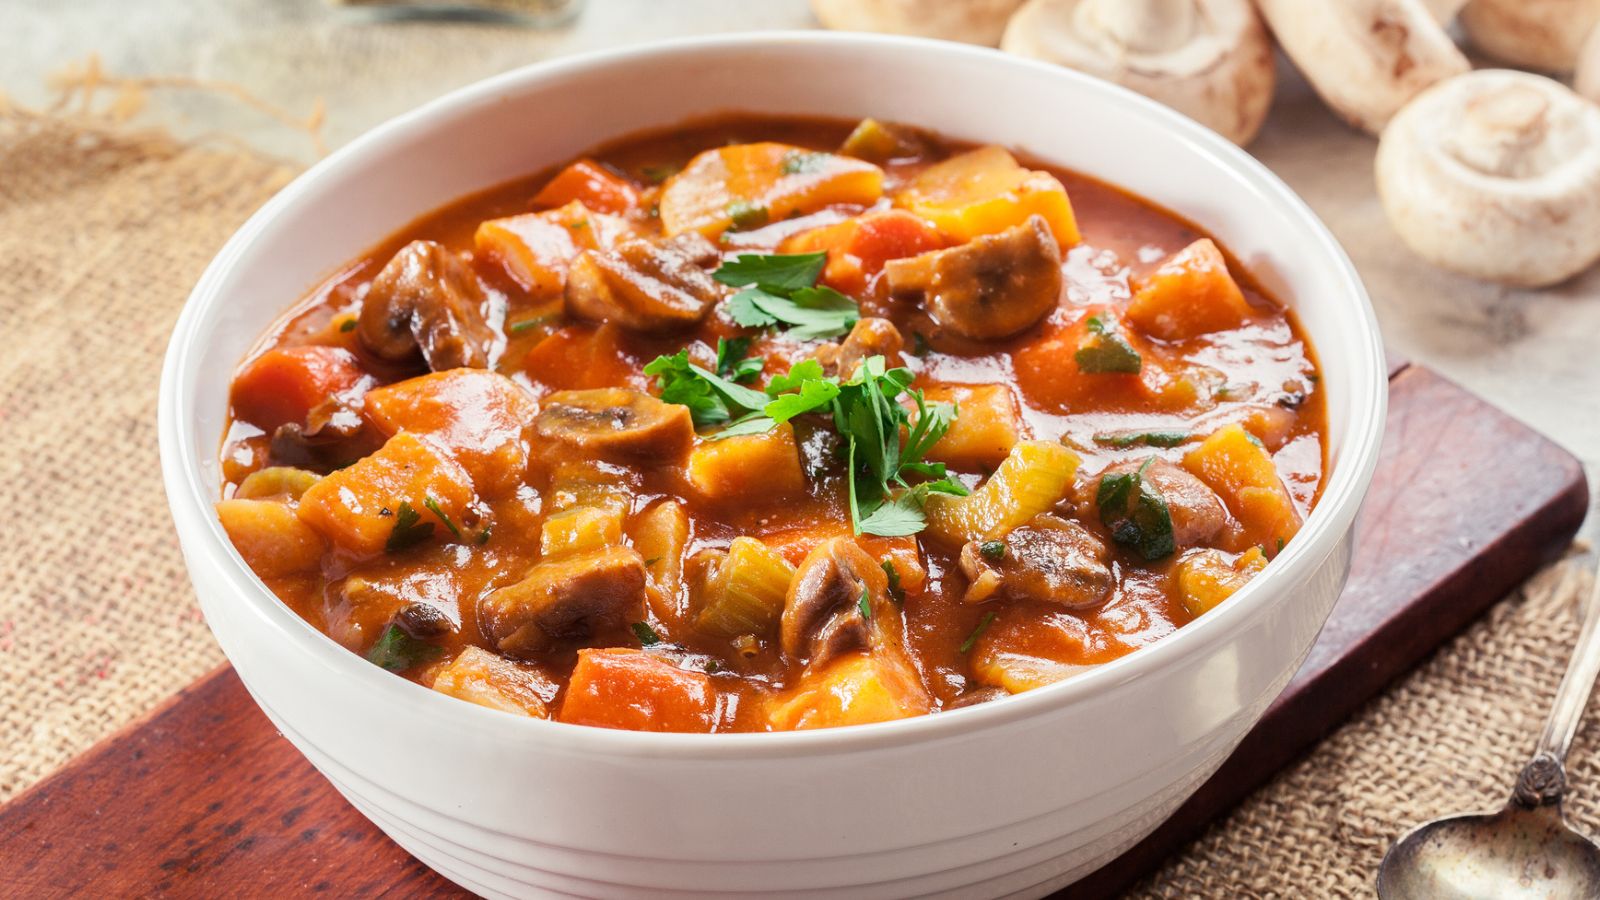 20 Inventive Healthy Stew Recipes to Shake Up Routine Meals